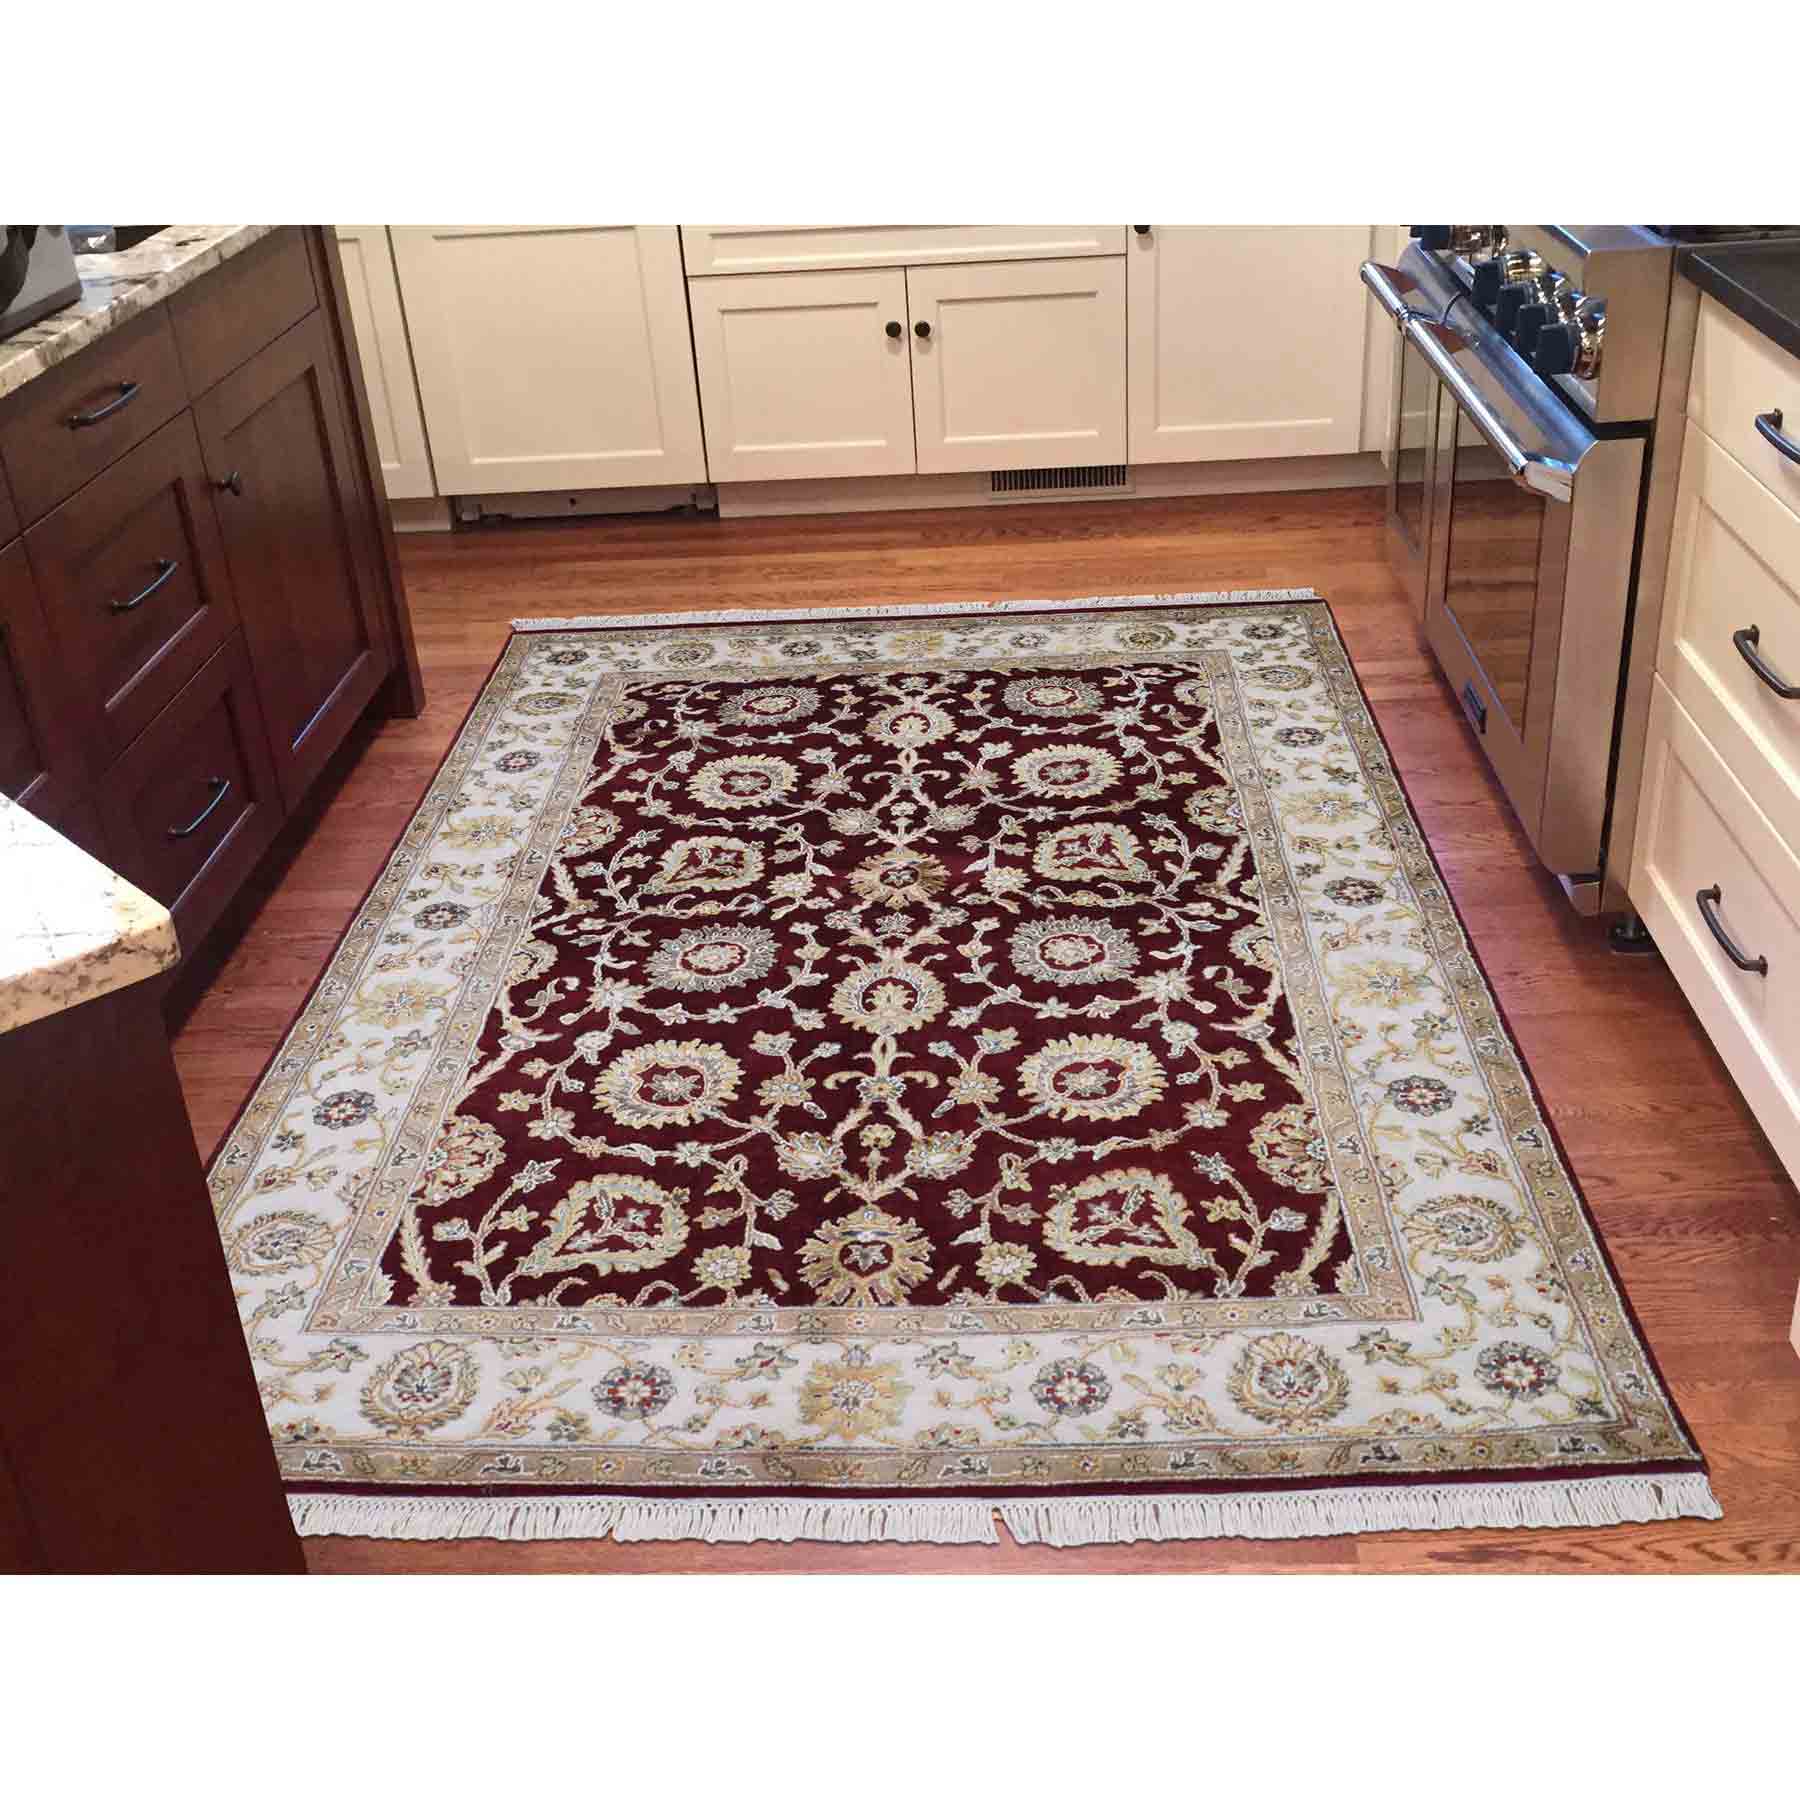 Rajasthan-Hand-Knotted-Rug-223015